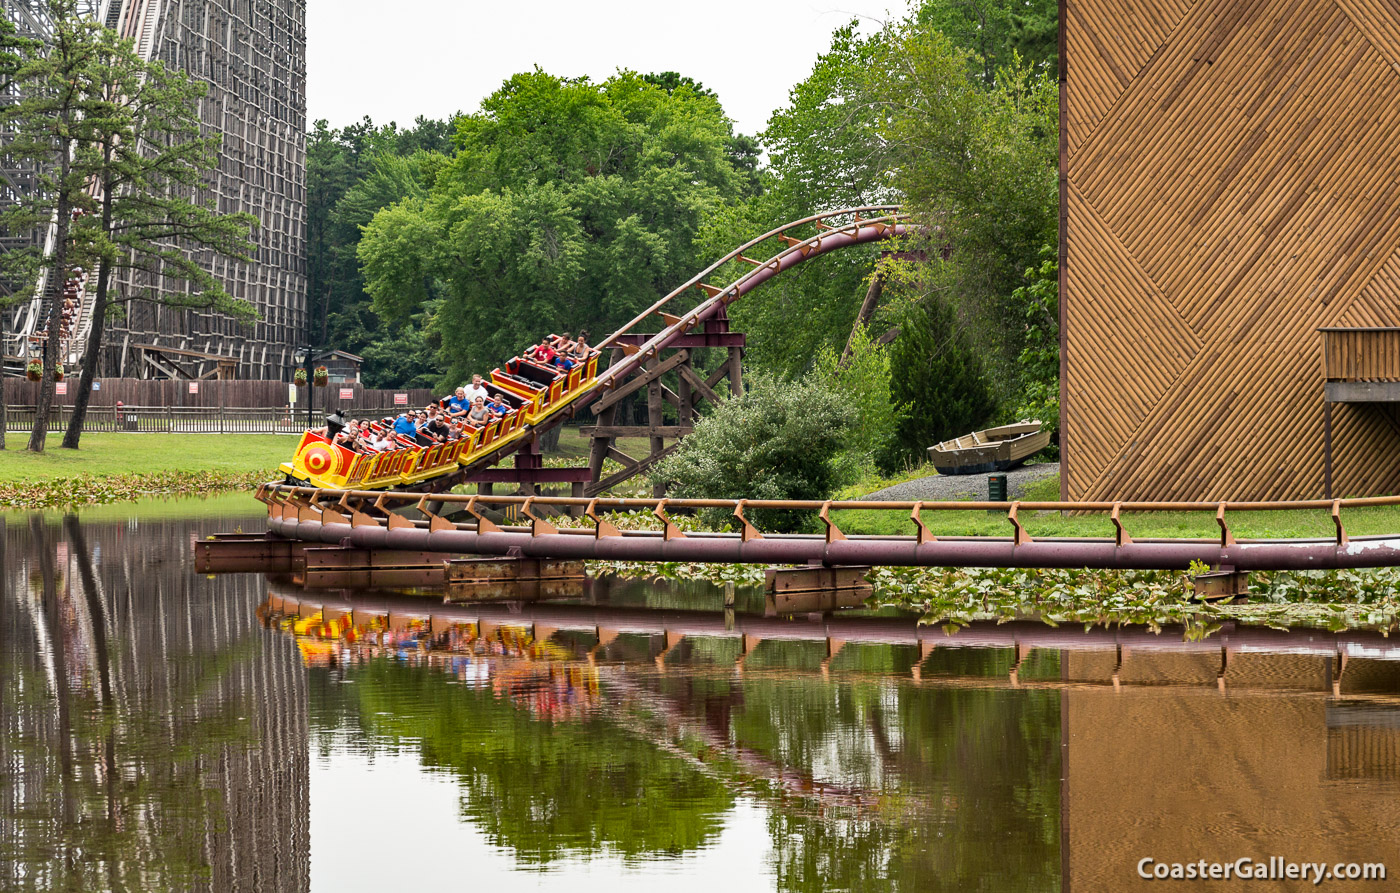 Runaway Mine Train reflected in the water